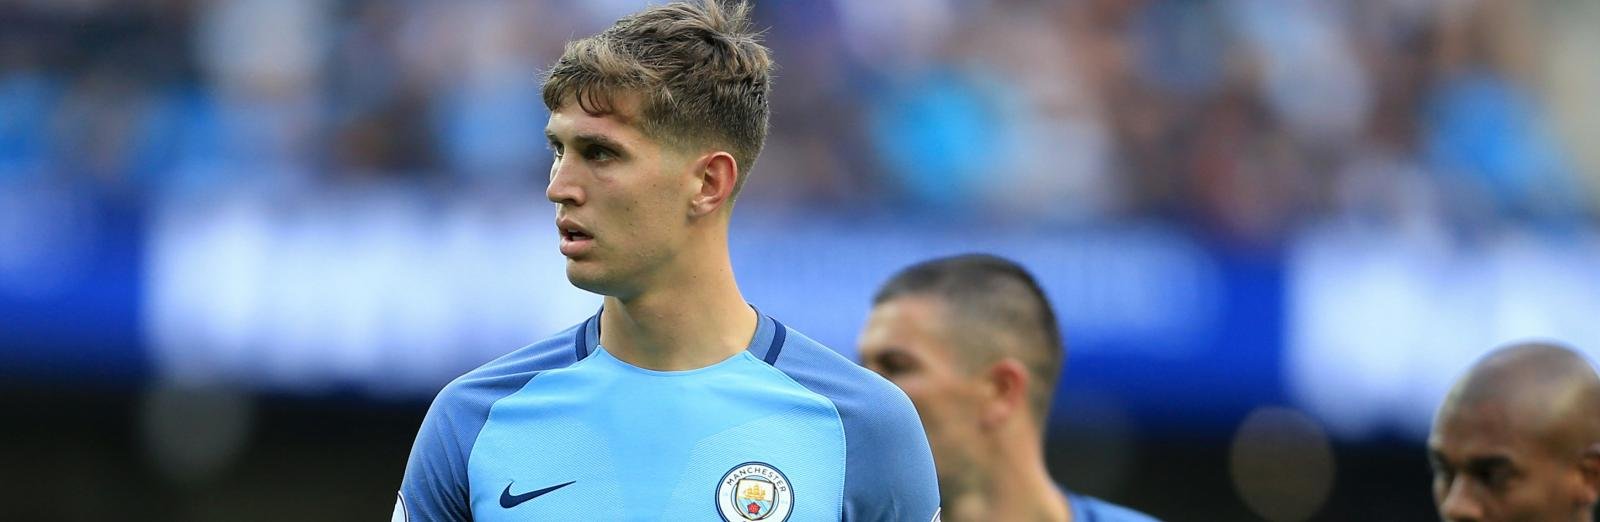 Pundit: “Man City’s John Stones could be the next Bobby Moore for England”